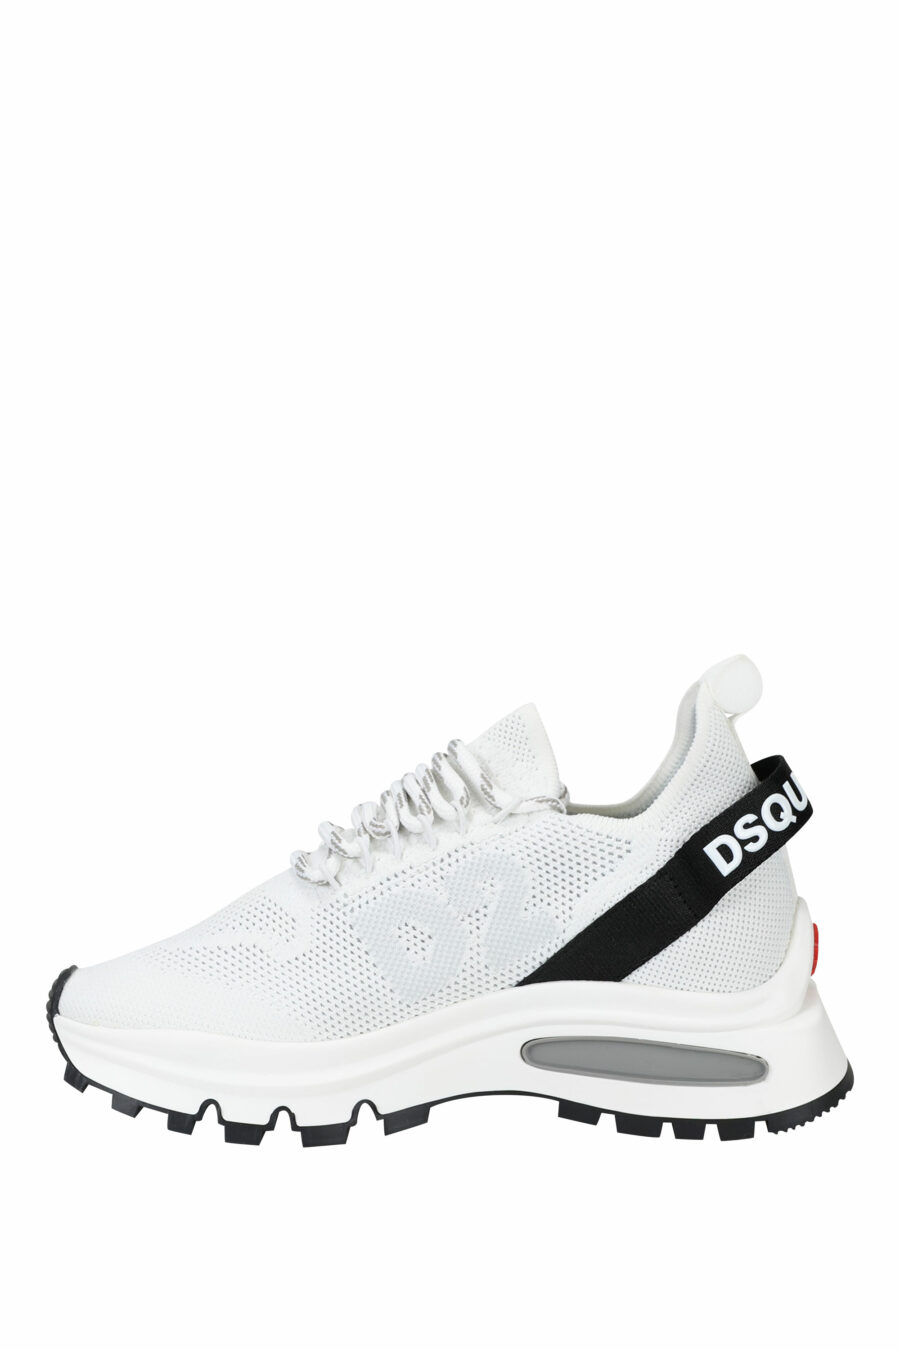 White trainers with black logo and inner tube sole - 8055777249857 2